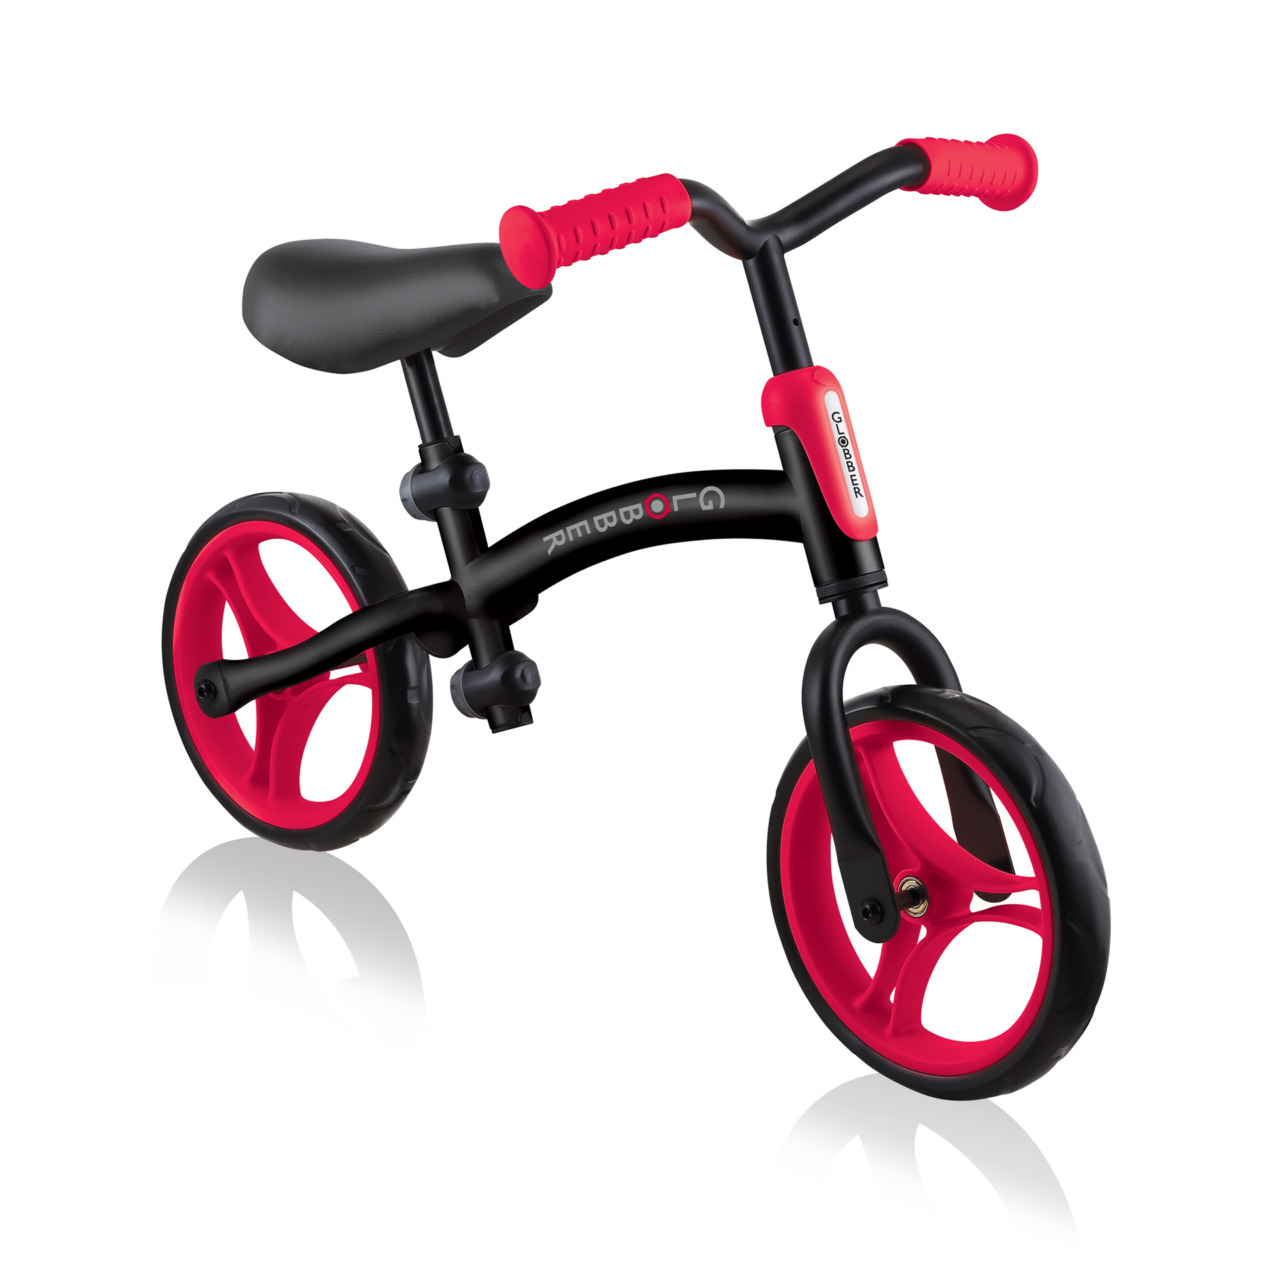 614 102 2 Best Convertible Balance Bike With Reversible Frame